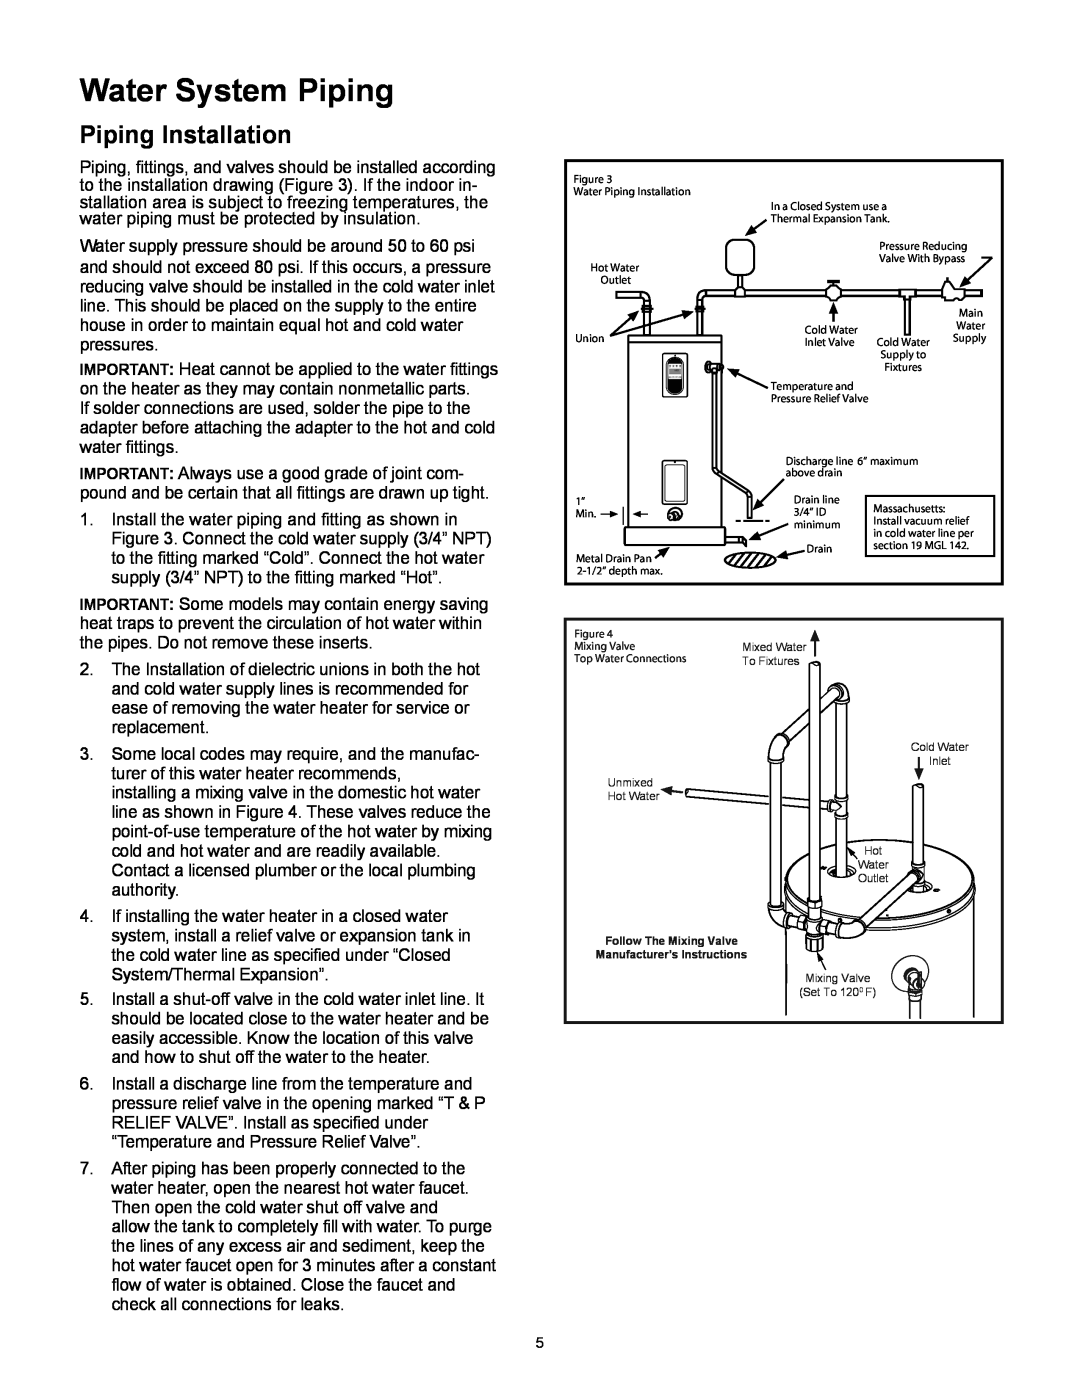 Whirlpool 318686-000 installation instructions Water System Piping, Piping Installation 